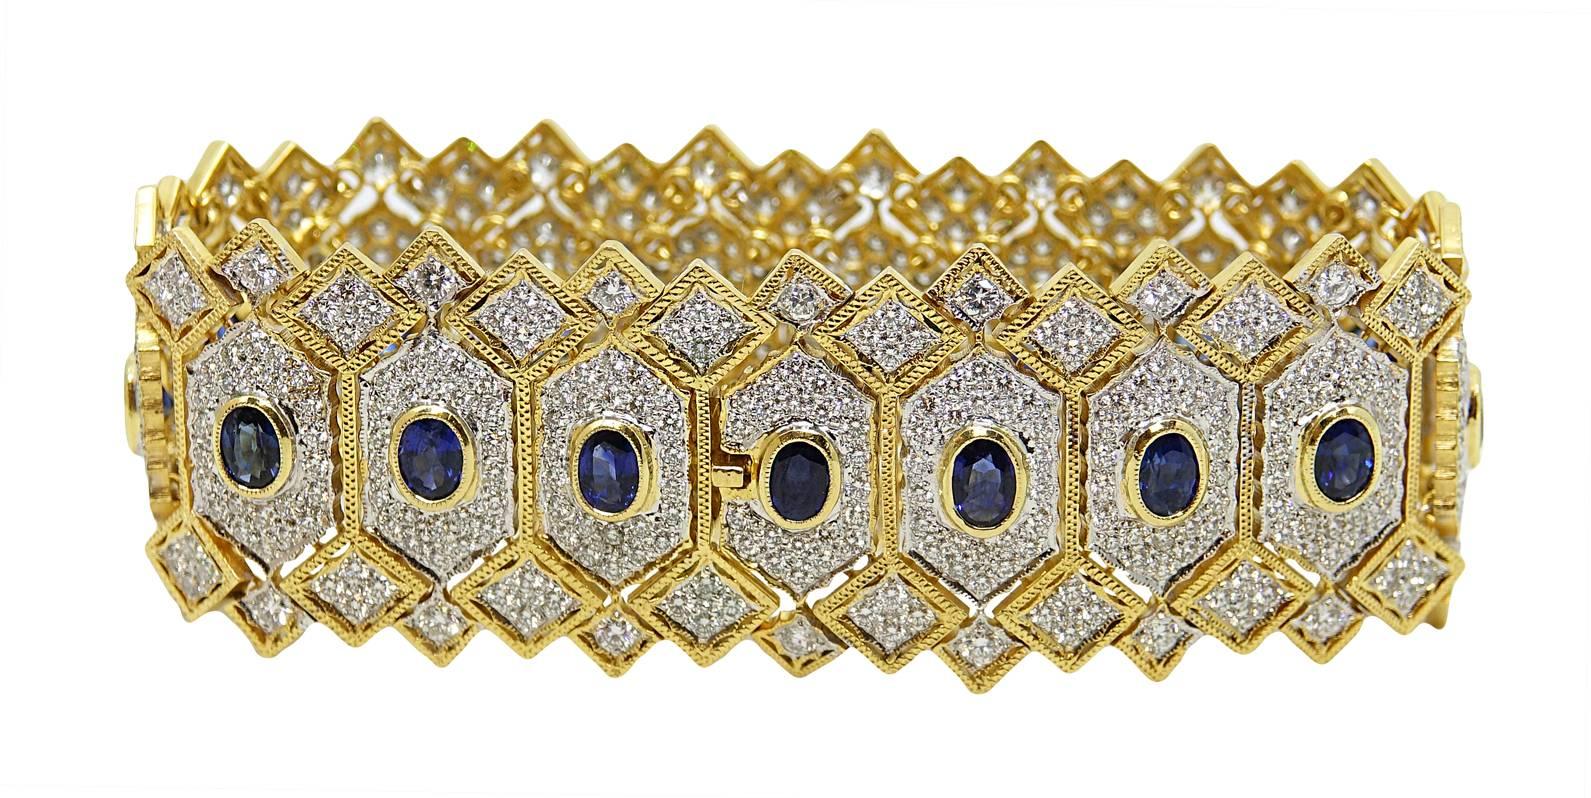 This 18K Yellow Gold and White Gold Bracelet Has A Total Of 18 Blue Oval Cut Sapphires Weighing A Total Carat Weight Of 9.00 Carats, and a Total Of 576 Diamonds Weighing A Total Carat Weight Of 10.00 Carats. This Bracelet Is 7.5 Inches In Length. 